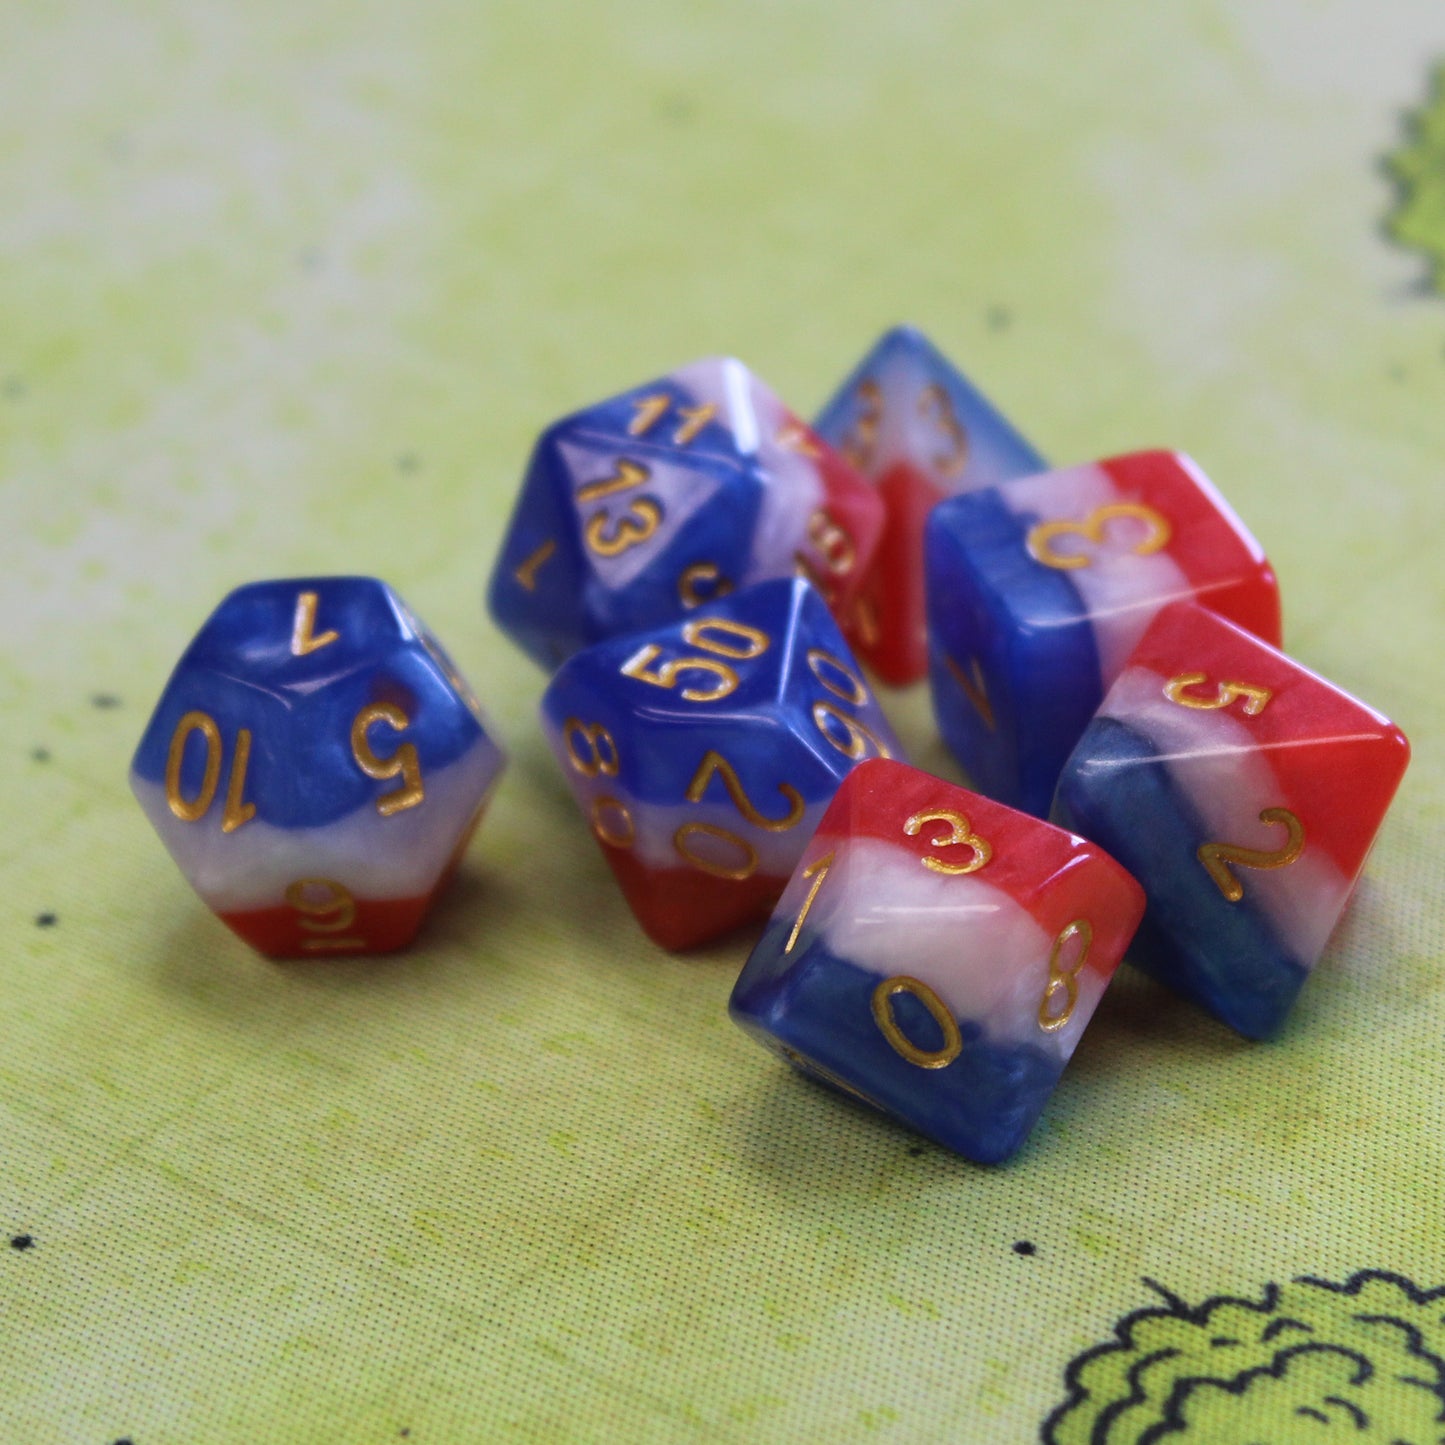 USA Red, White, and Blue dice set